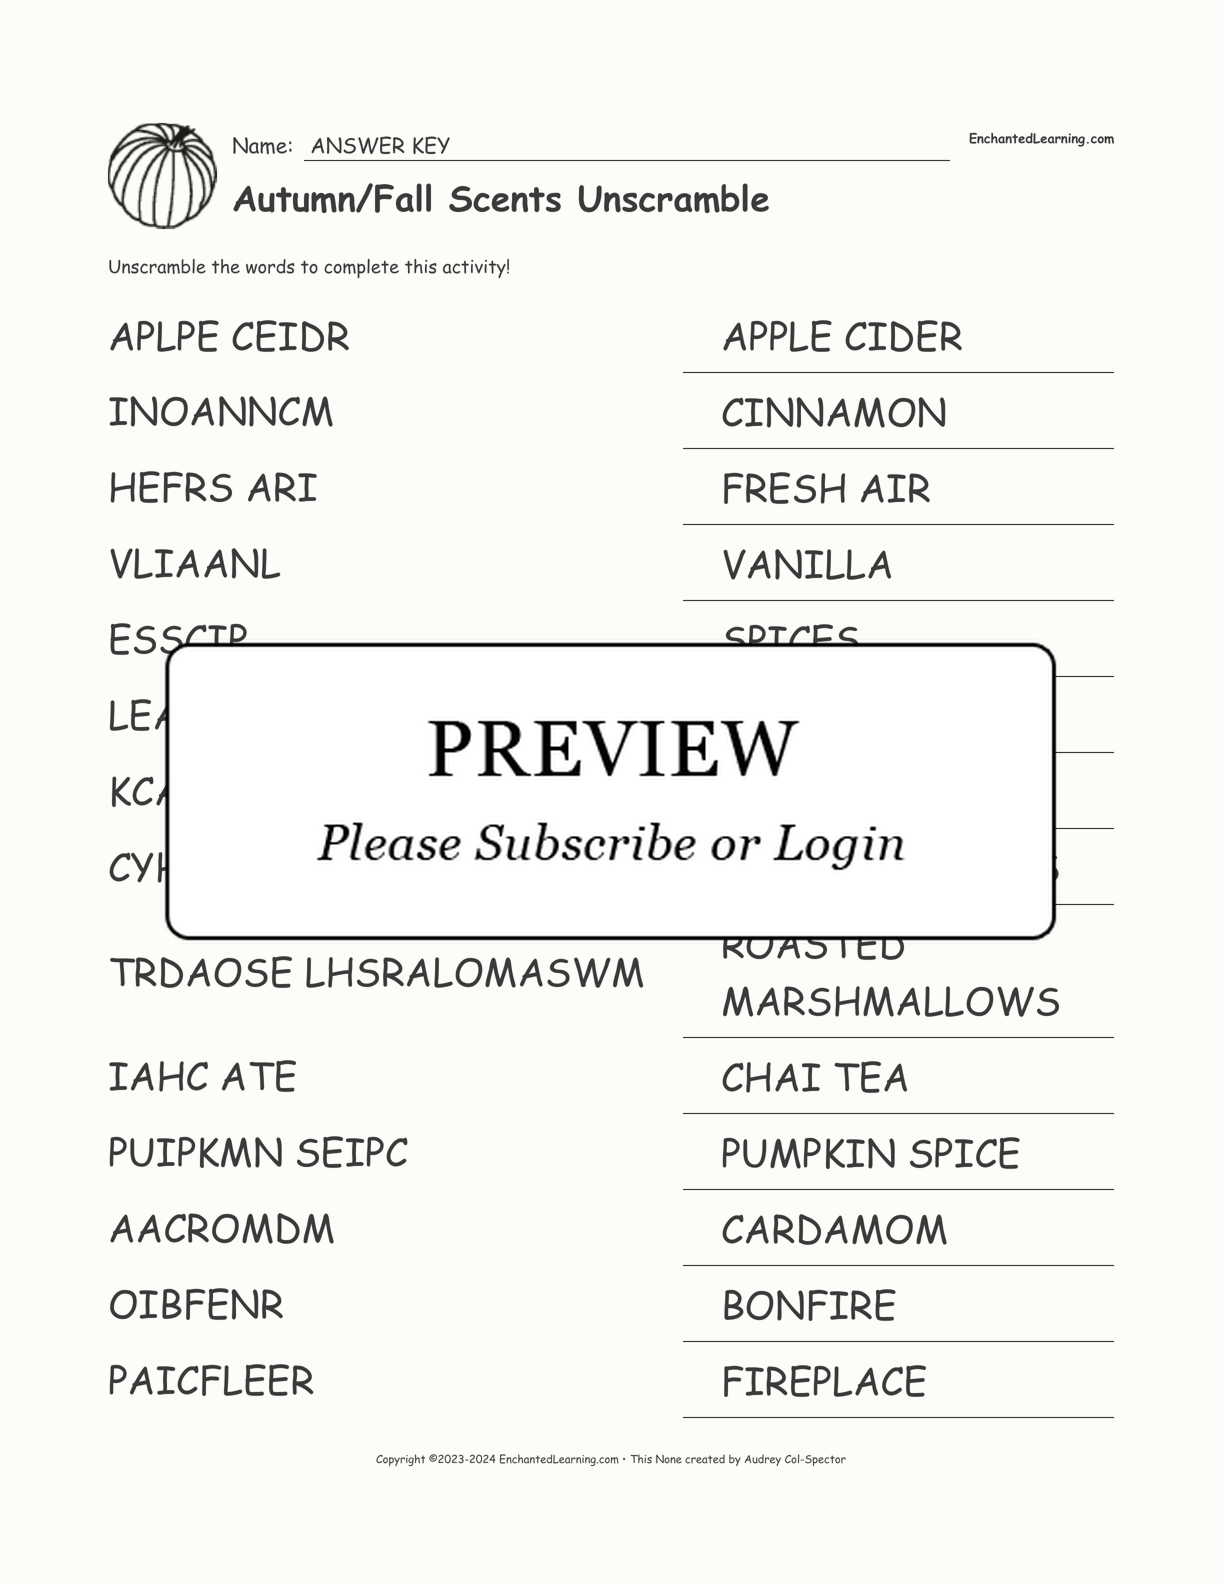 Autumn/Fall Scents Unscramble interactive worksheet page 2